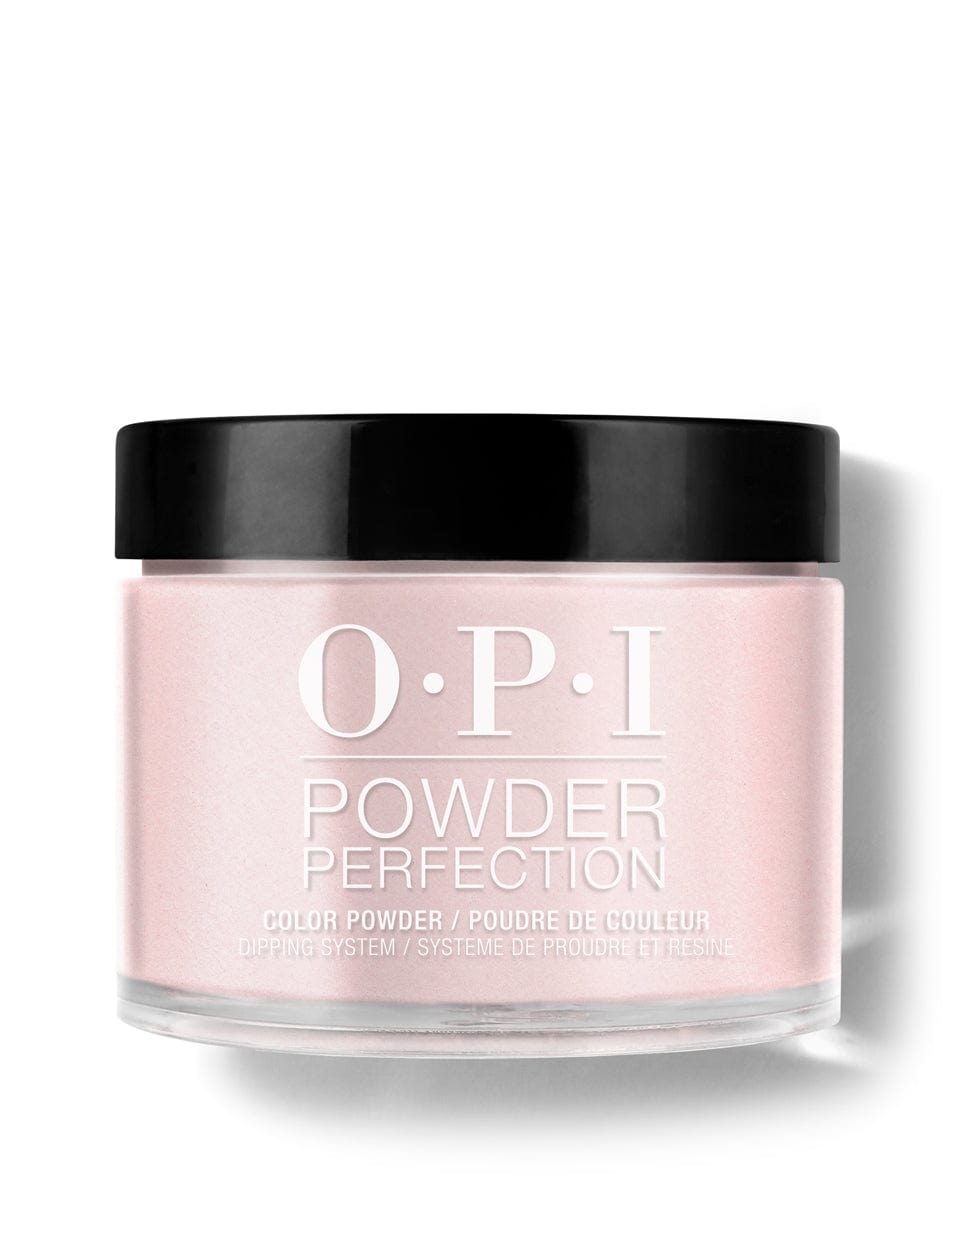 OPI Powder Perfection DPT31 My Address is "Hollywood" 43g (1.5oz)